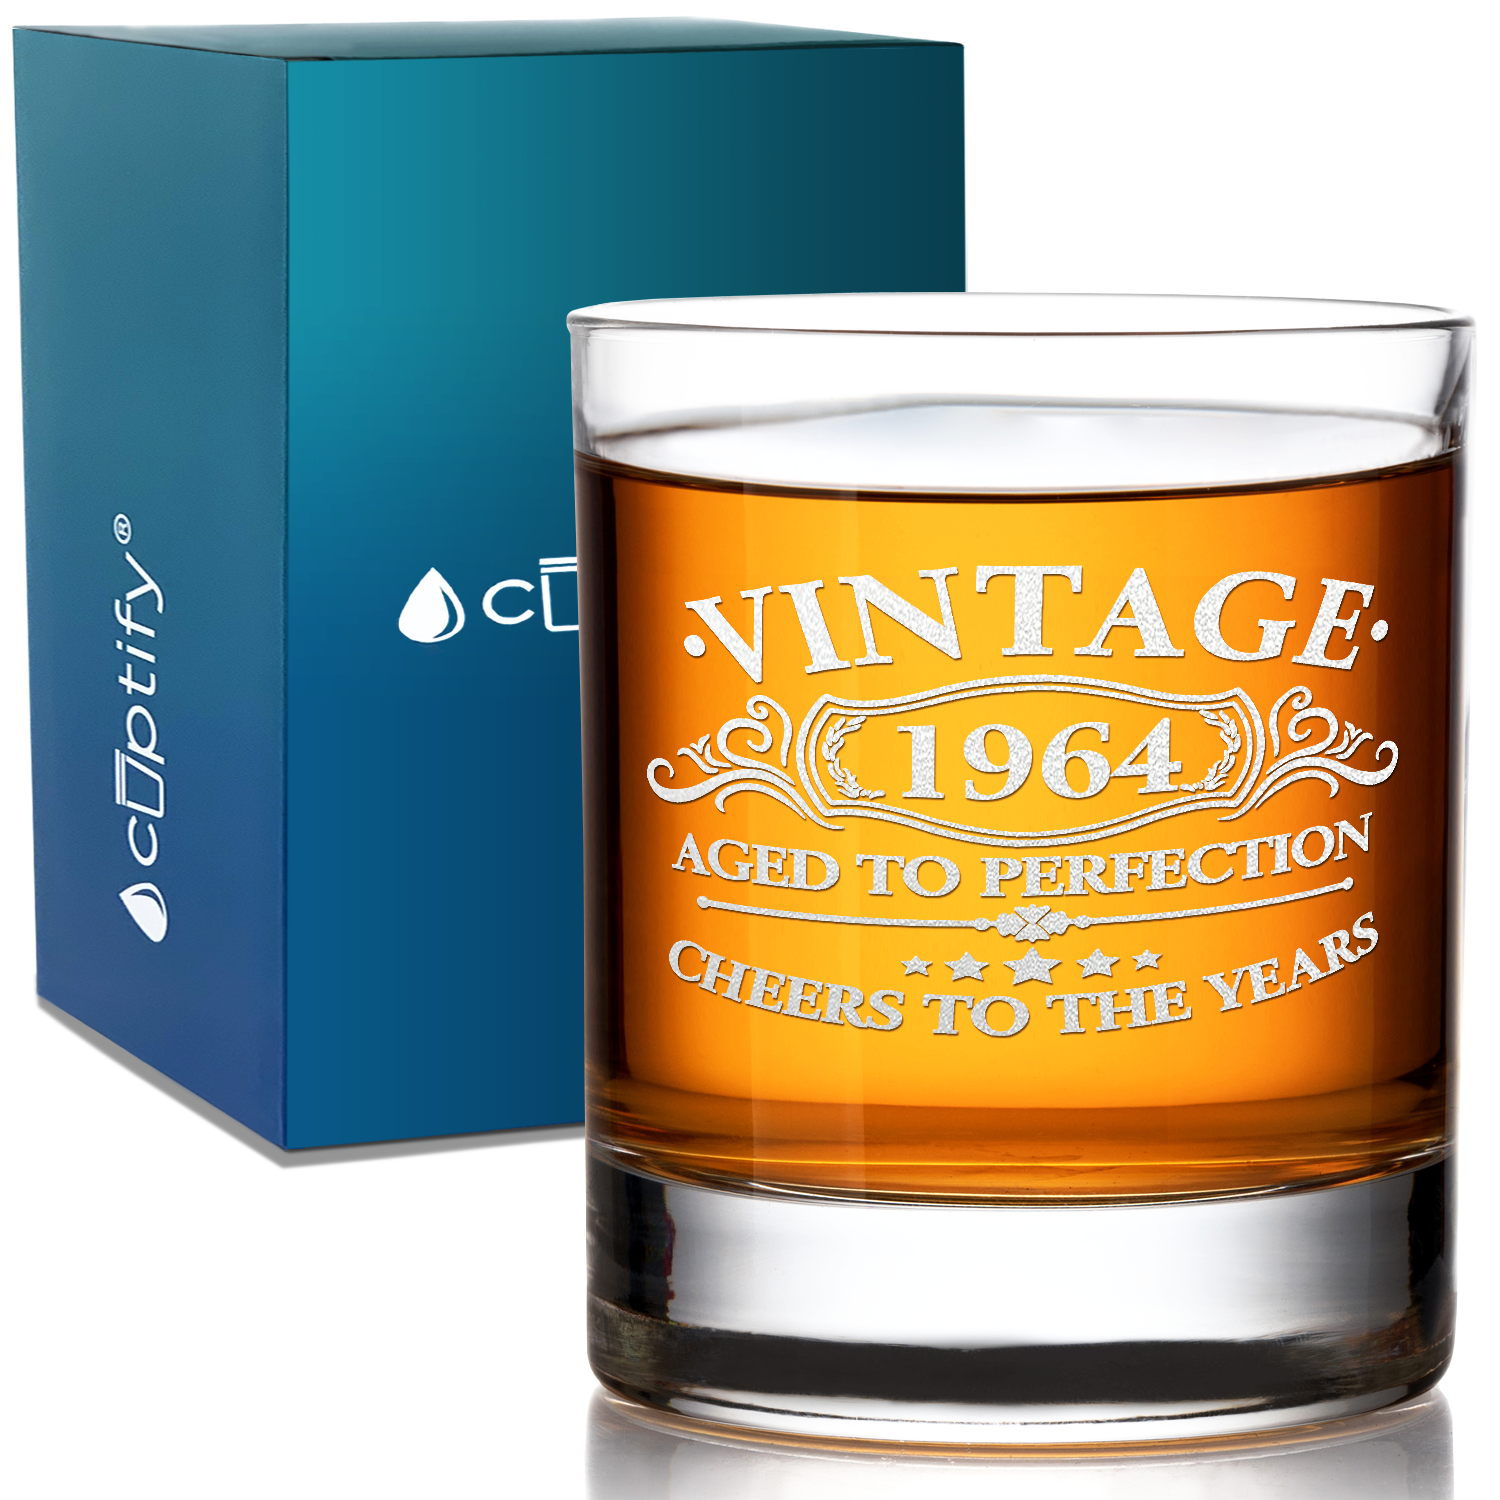 Vintage Aged To Perfection Cheers To 57 Years 1964 Laser Engraved on 10.25oz Old Fashion Glass